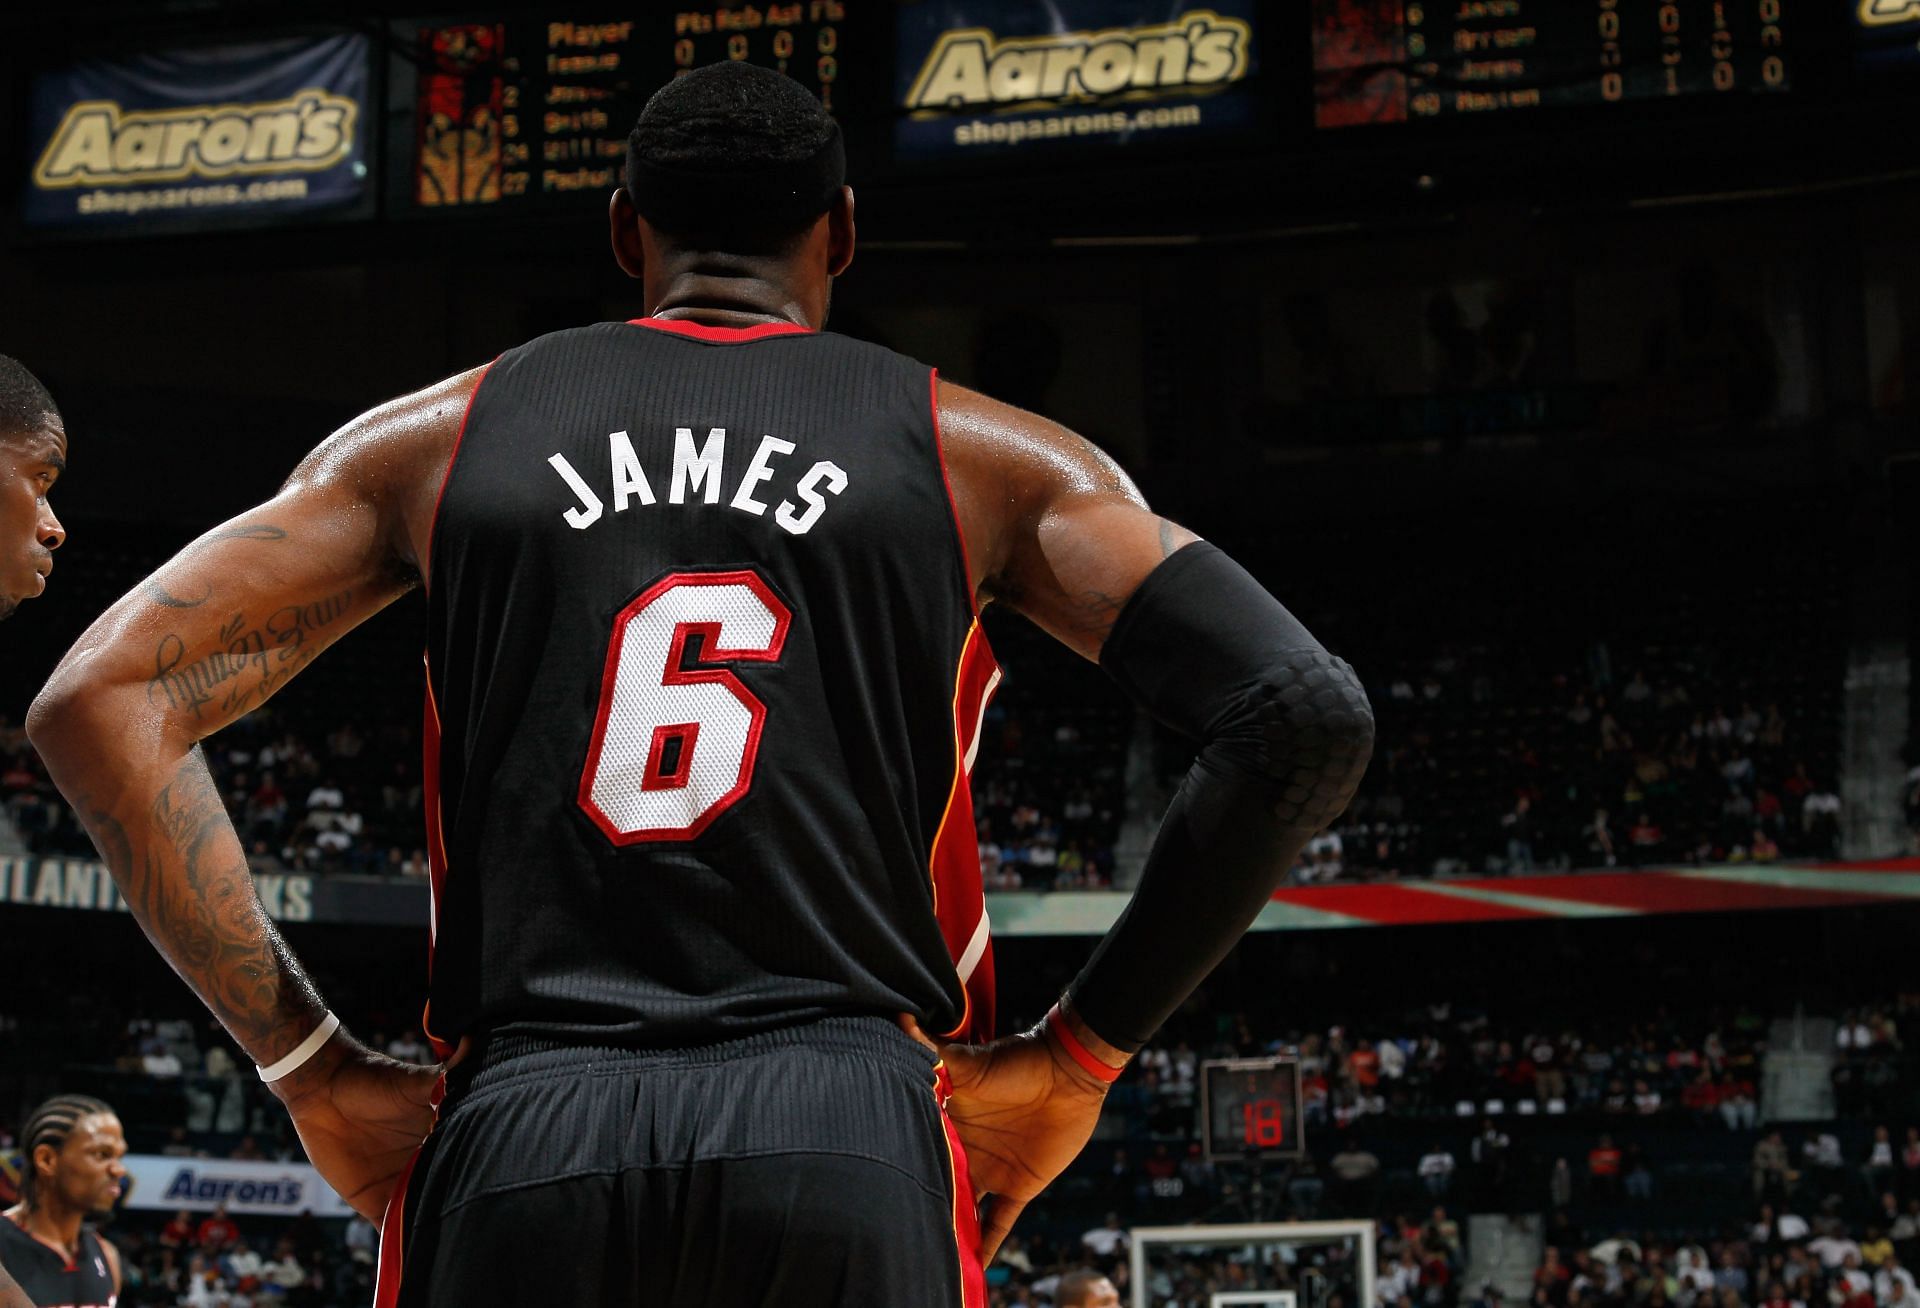 The reason LeBron James switched back to wearing the No. 6 with